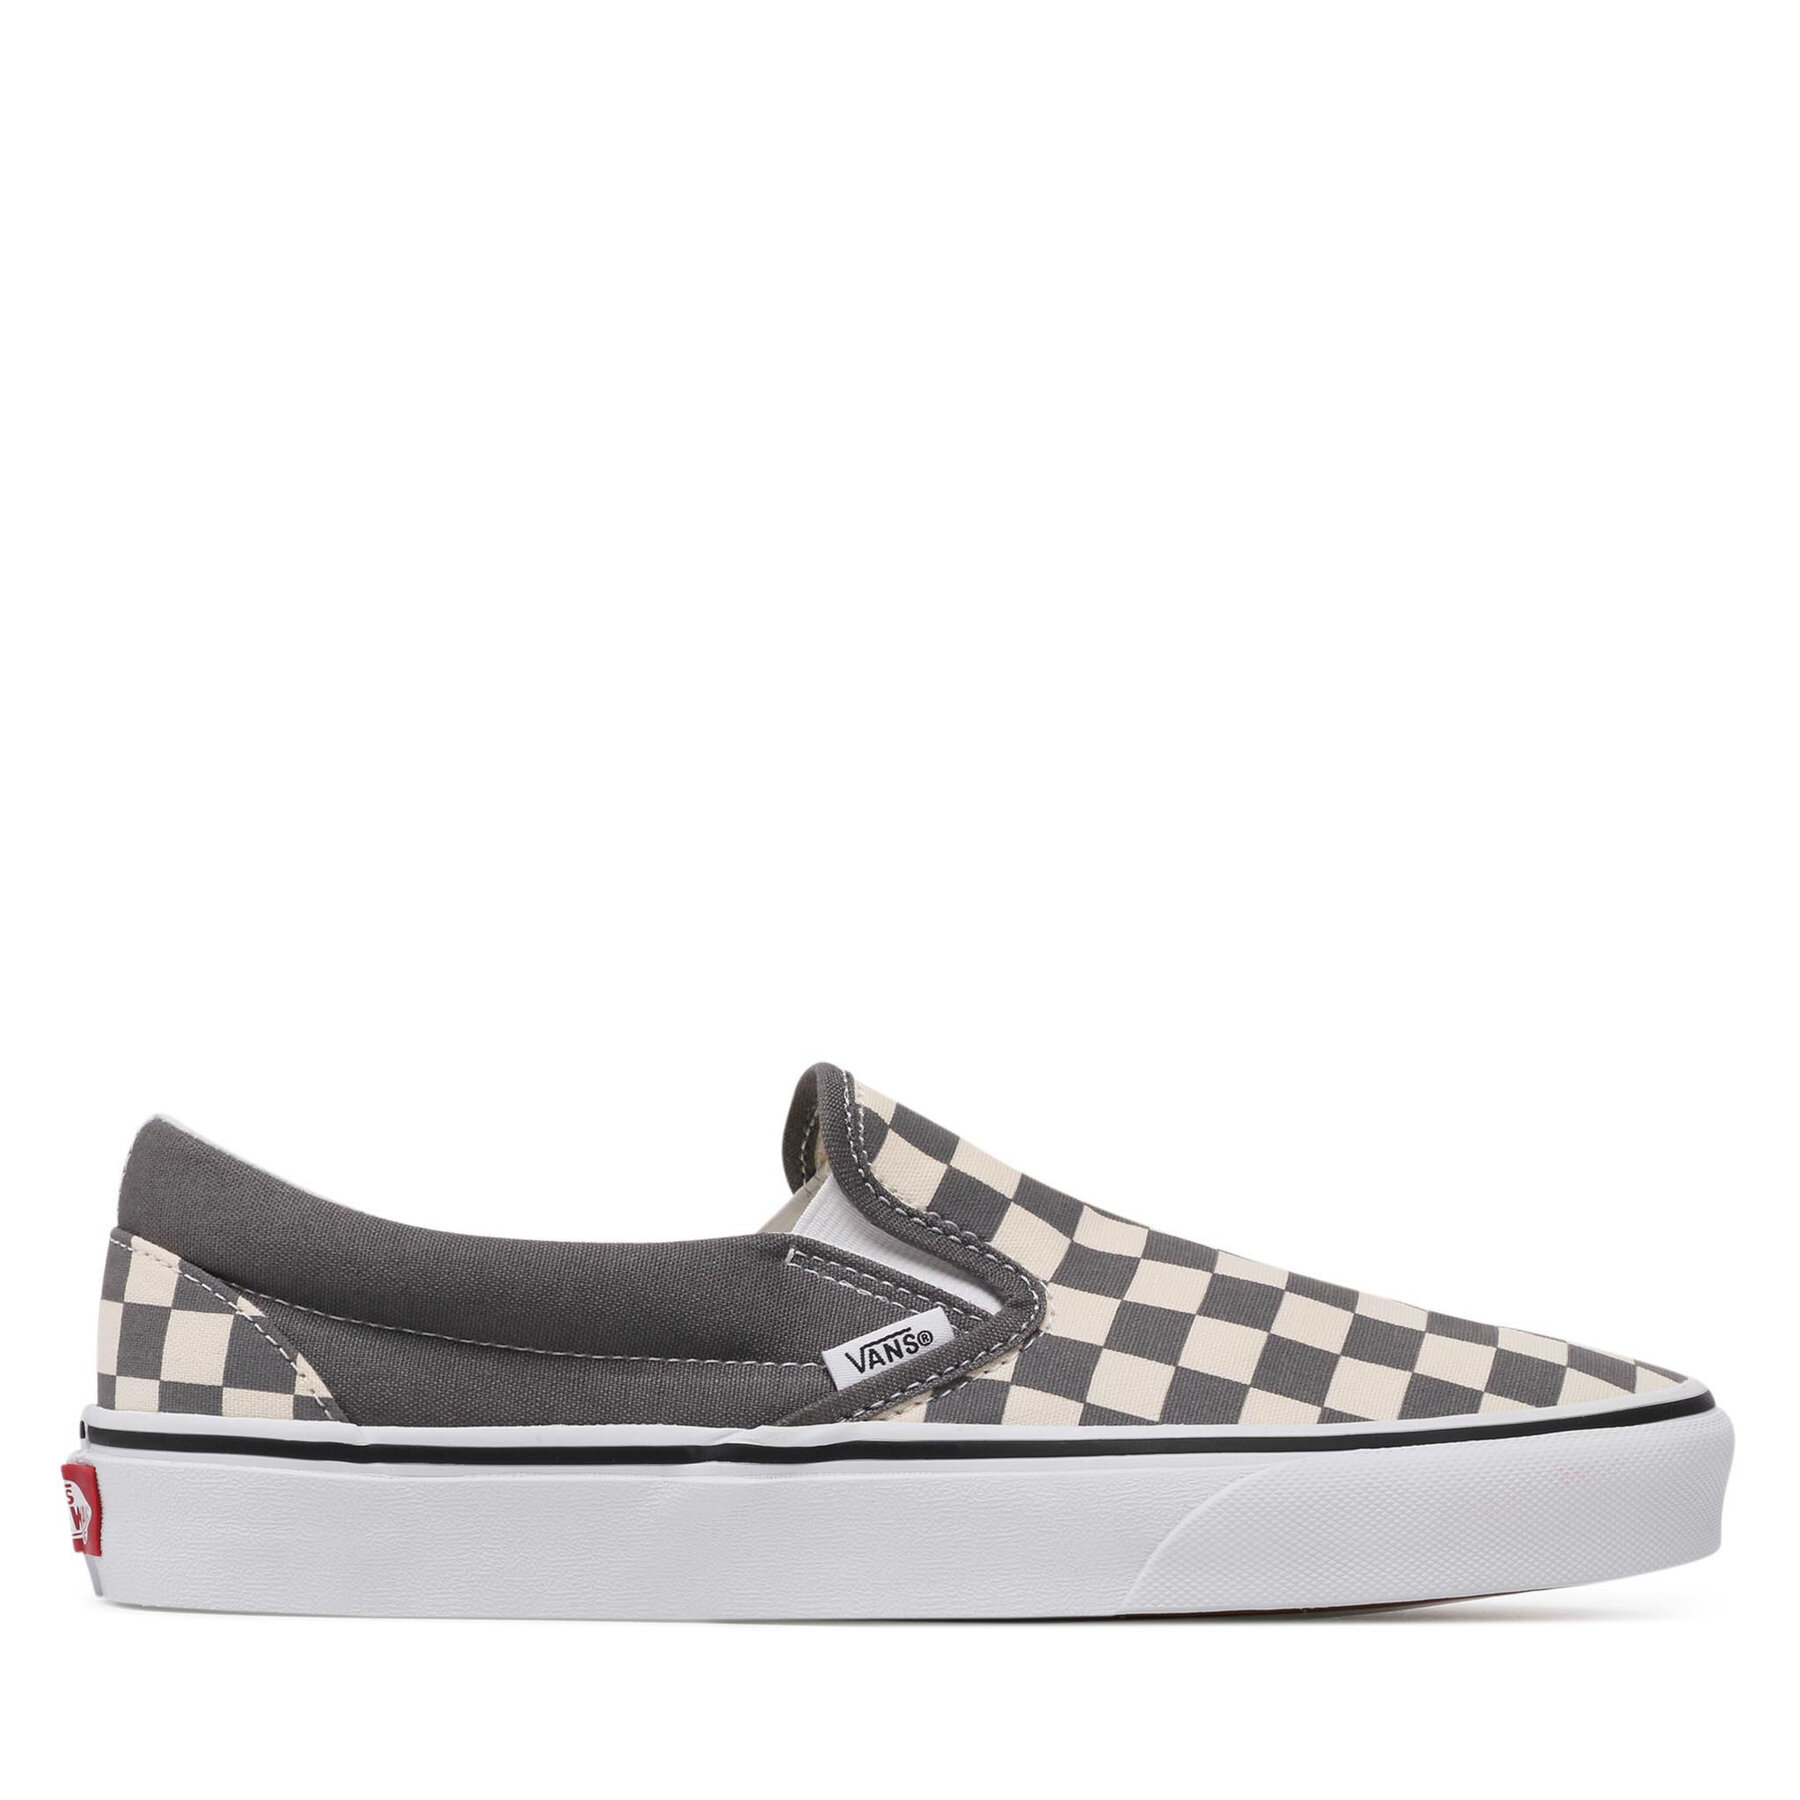 Tenis superge Vans Classic Slip-O VN0A4BV3TB51 (Checkerboard)Pewtertrwht